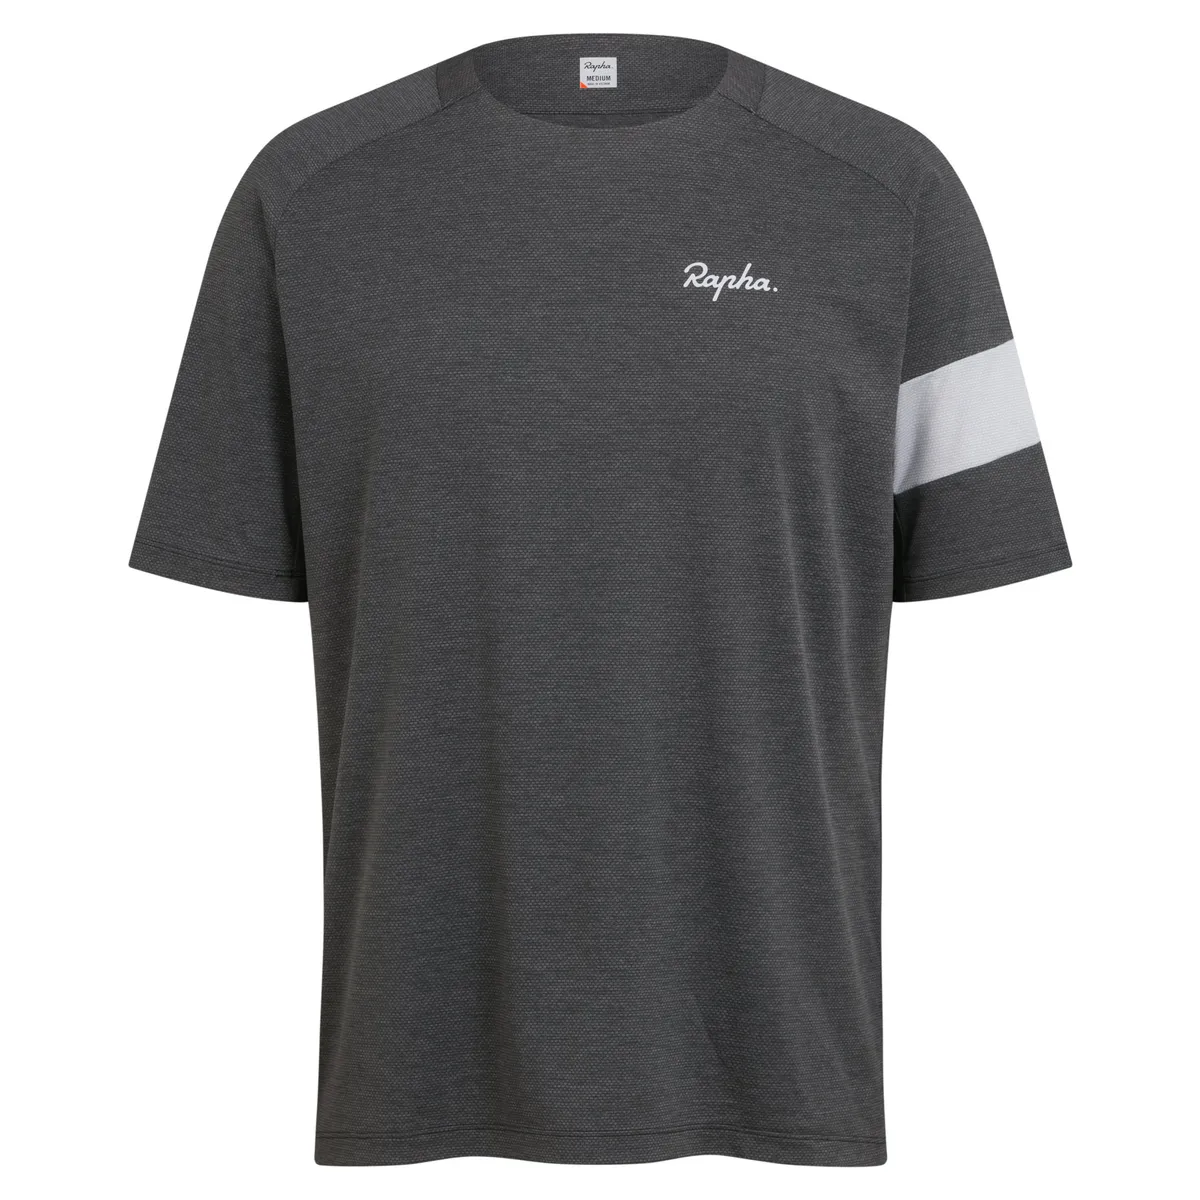 Rapha Trail Technical T-shirt in Anthracite and Micro Chip